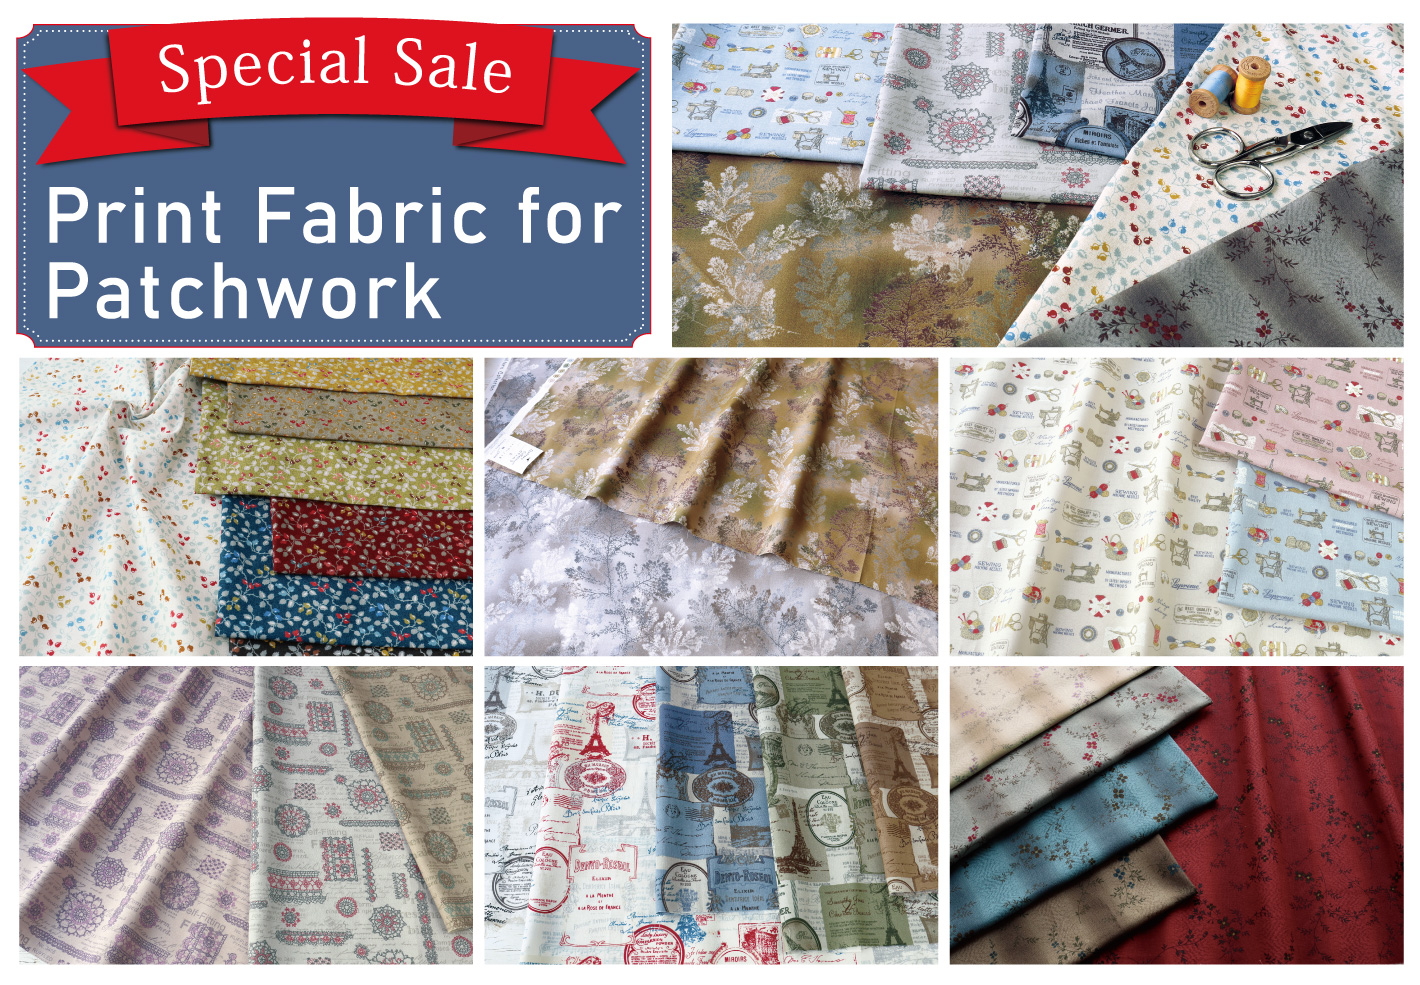 Bargain Price Printed Fabric for Patchwork